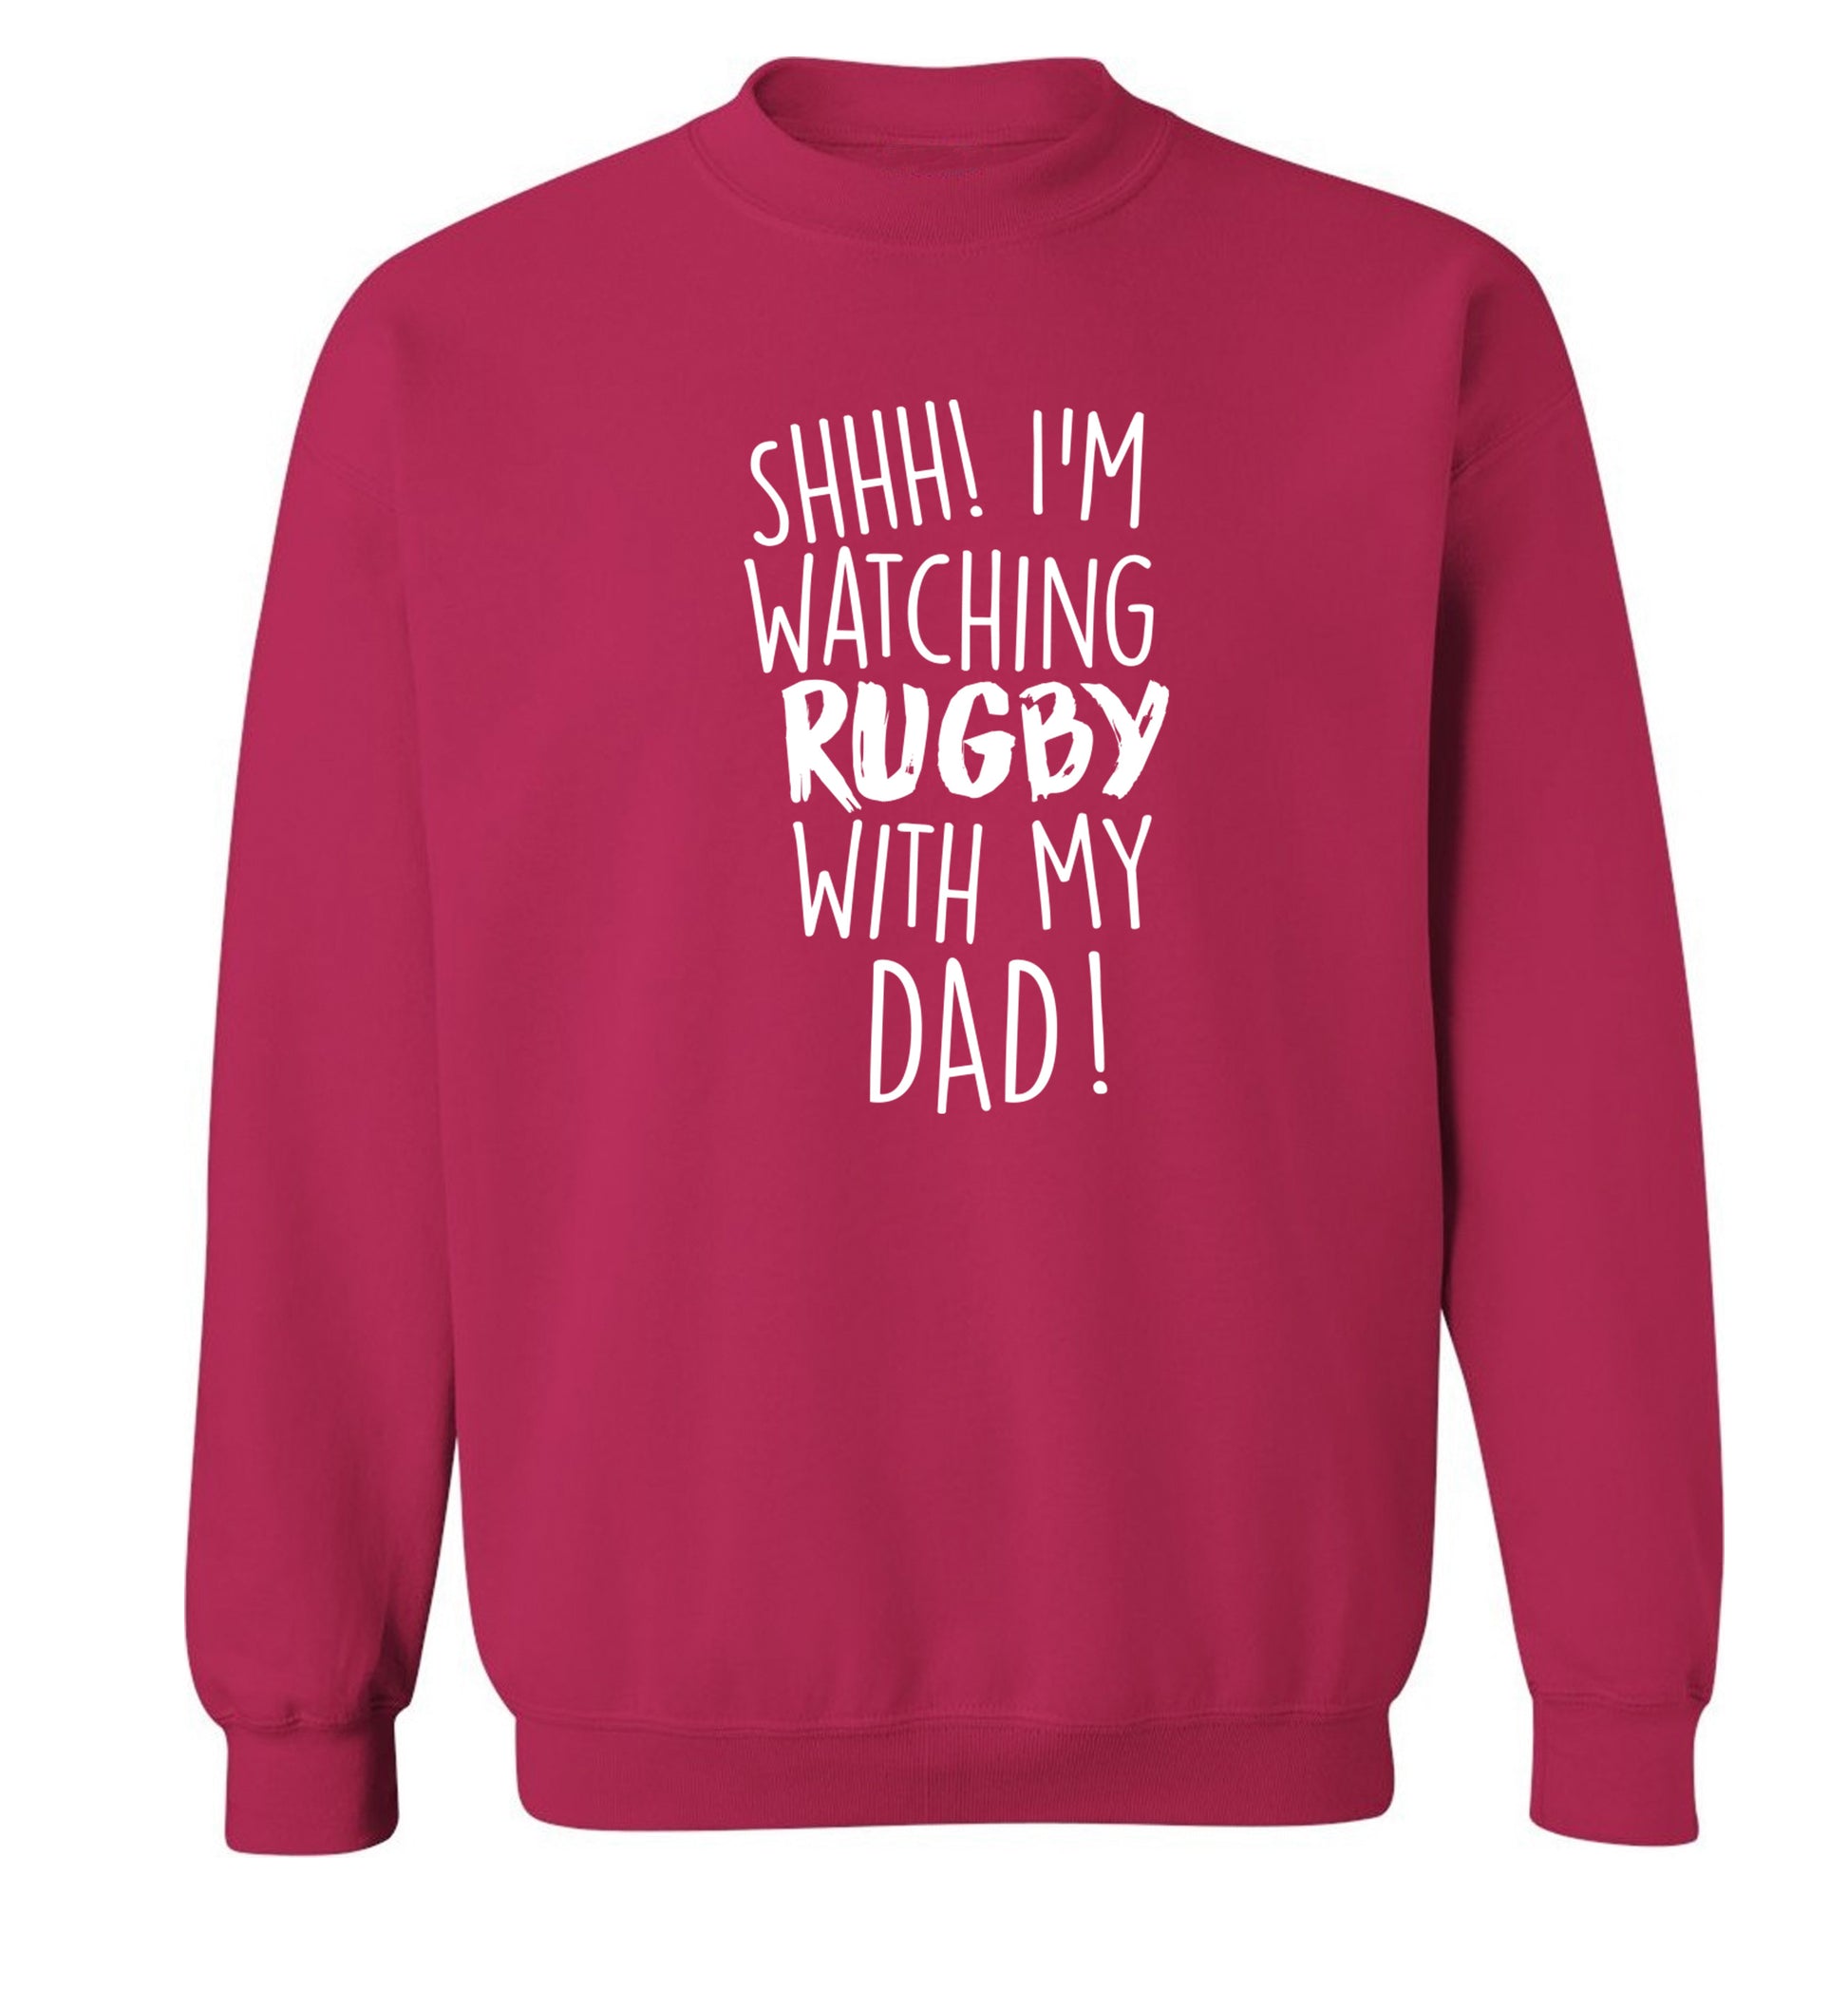 Shh... I'm watching rugby with my dad Adult's unisex pink Sweater 2XL